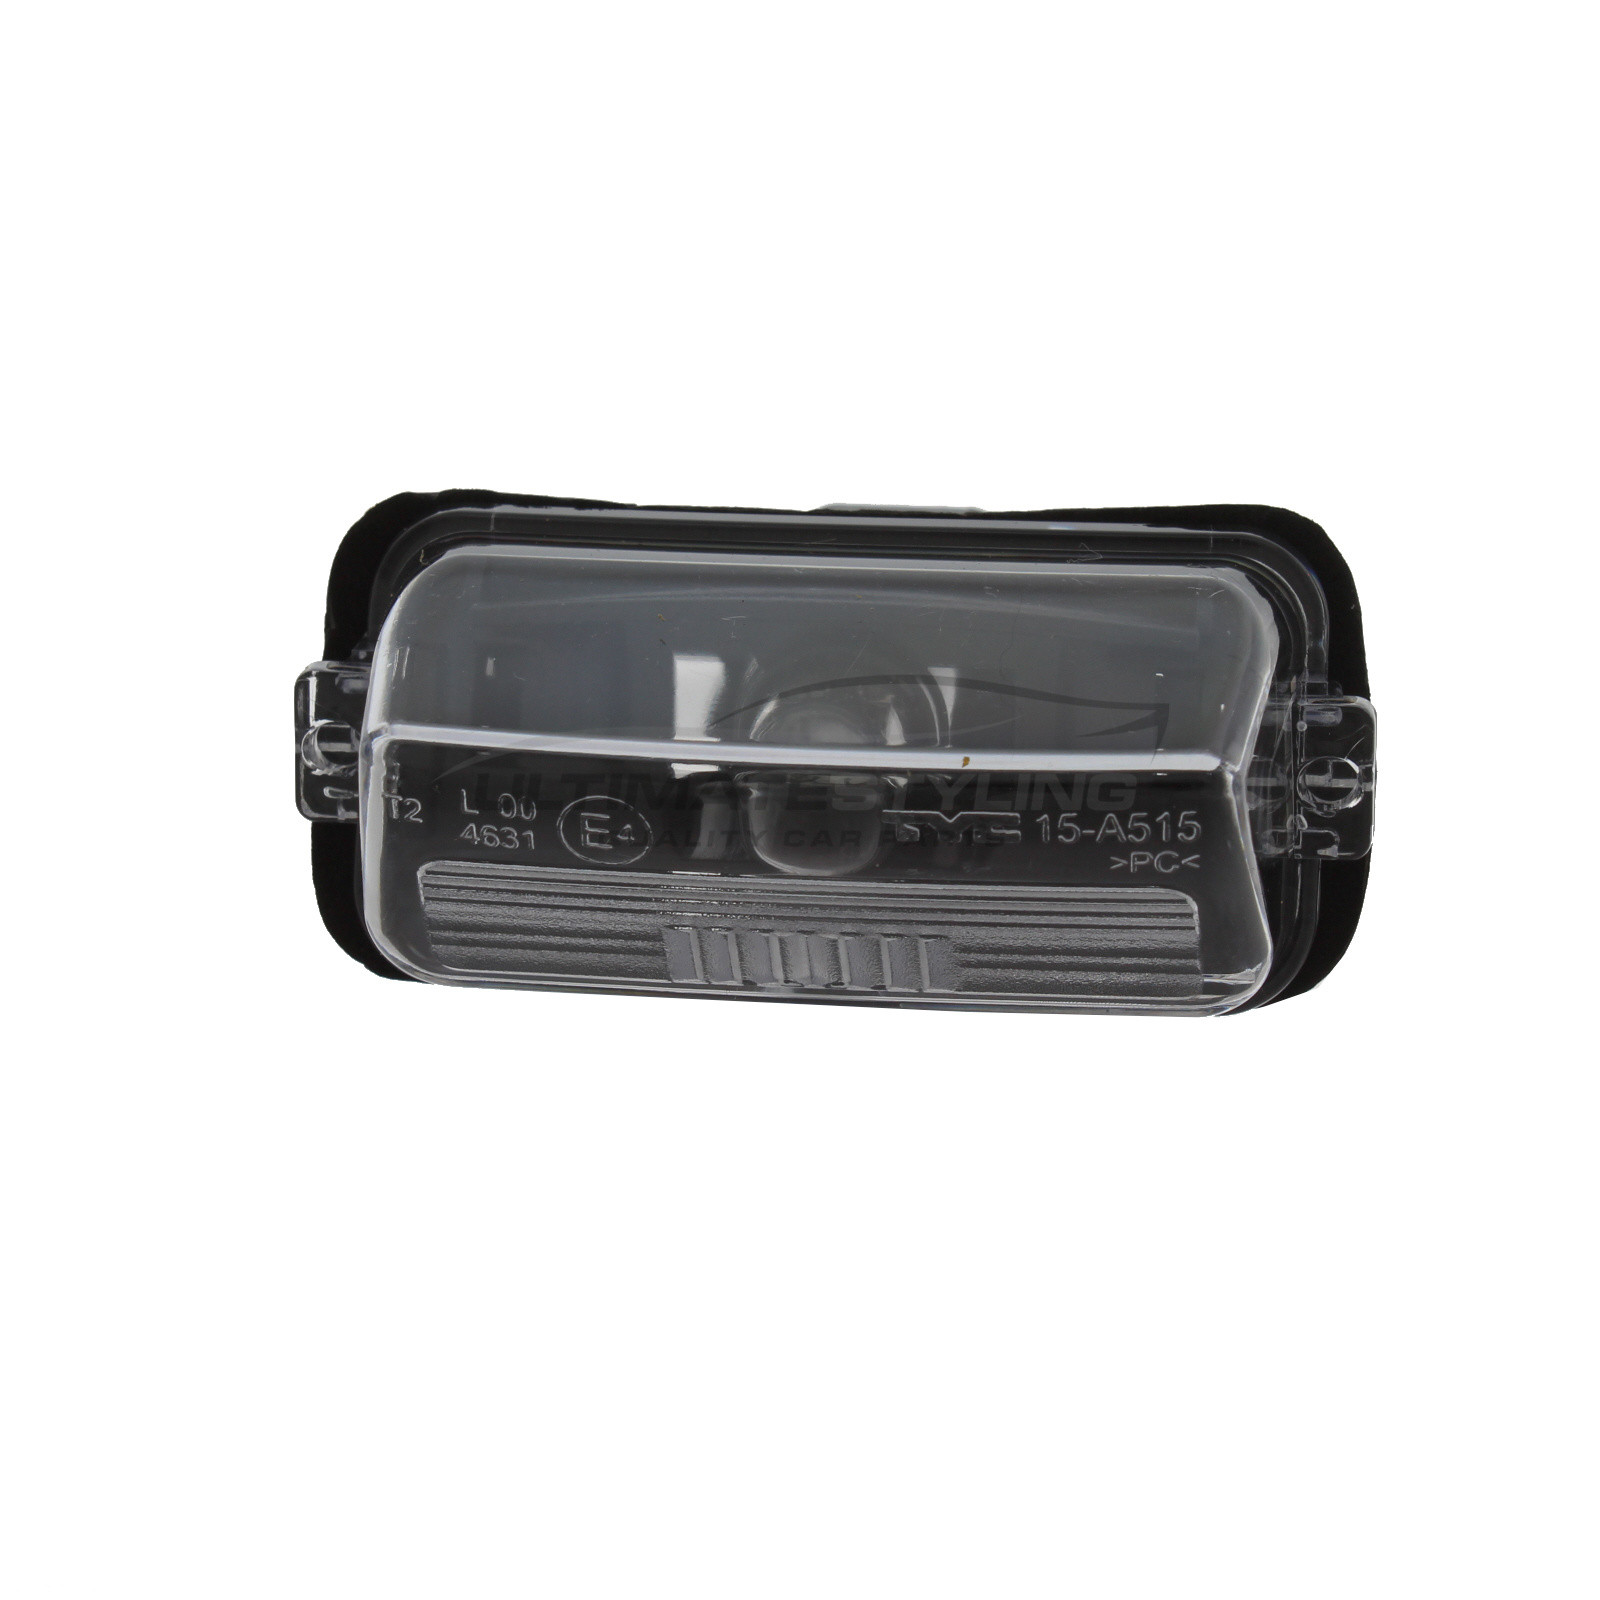 Toyota Auris / Avensis / Verso-S / Yaris Rear Number Plate Light